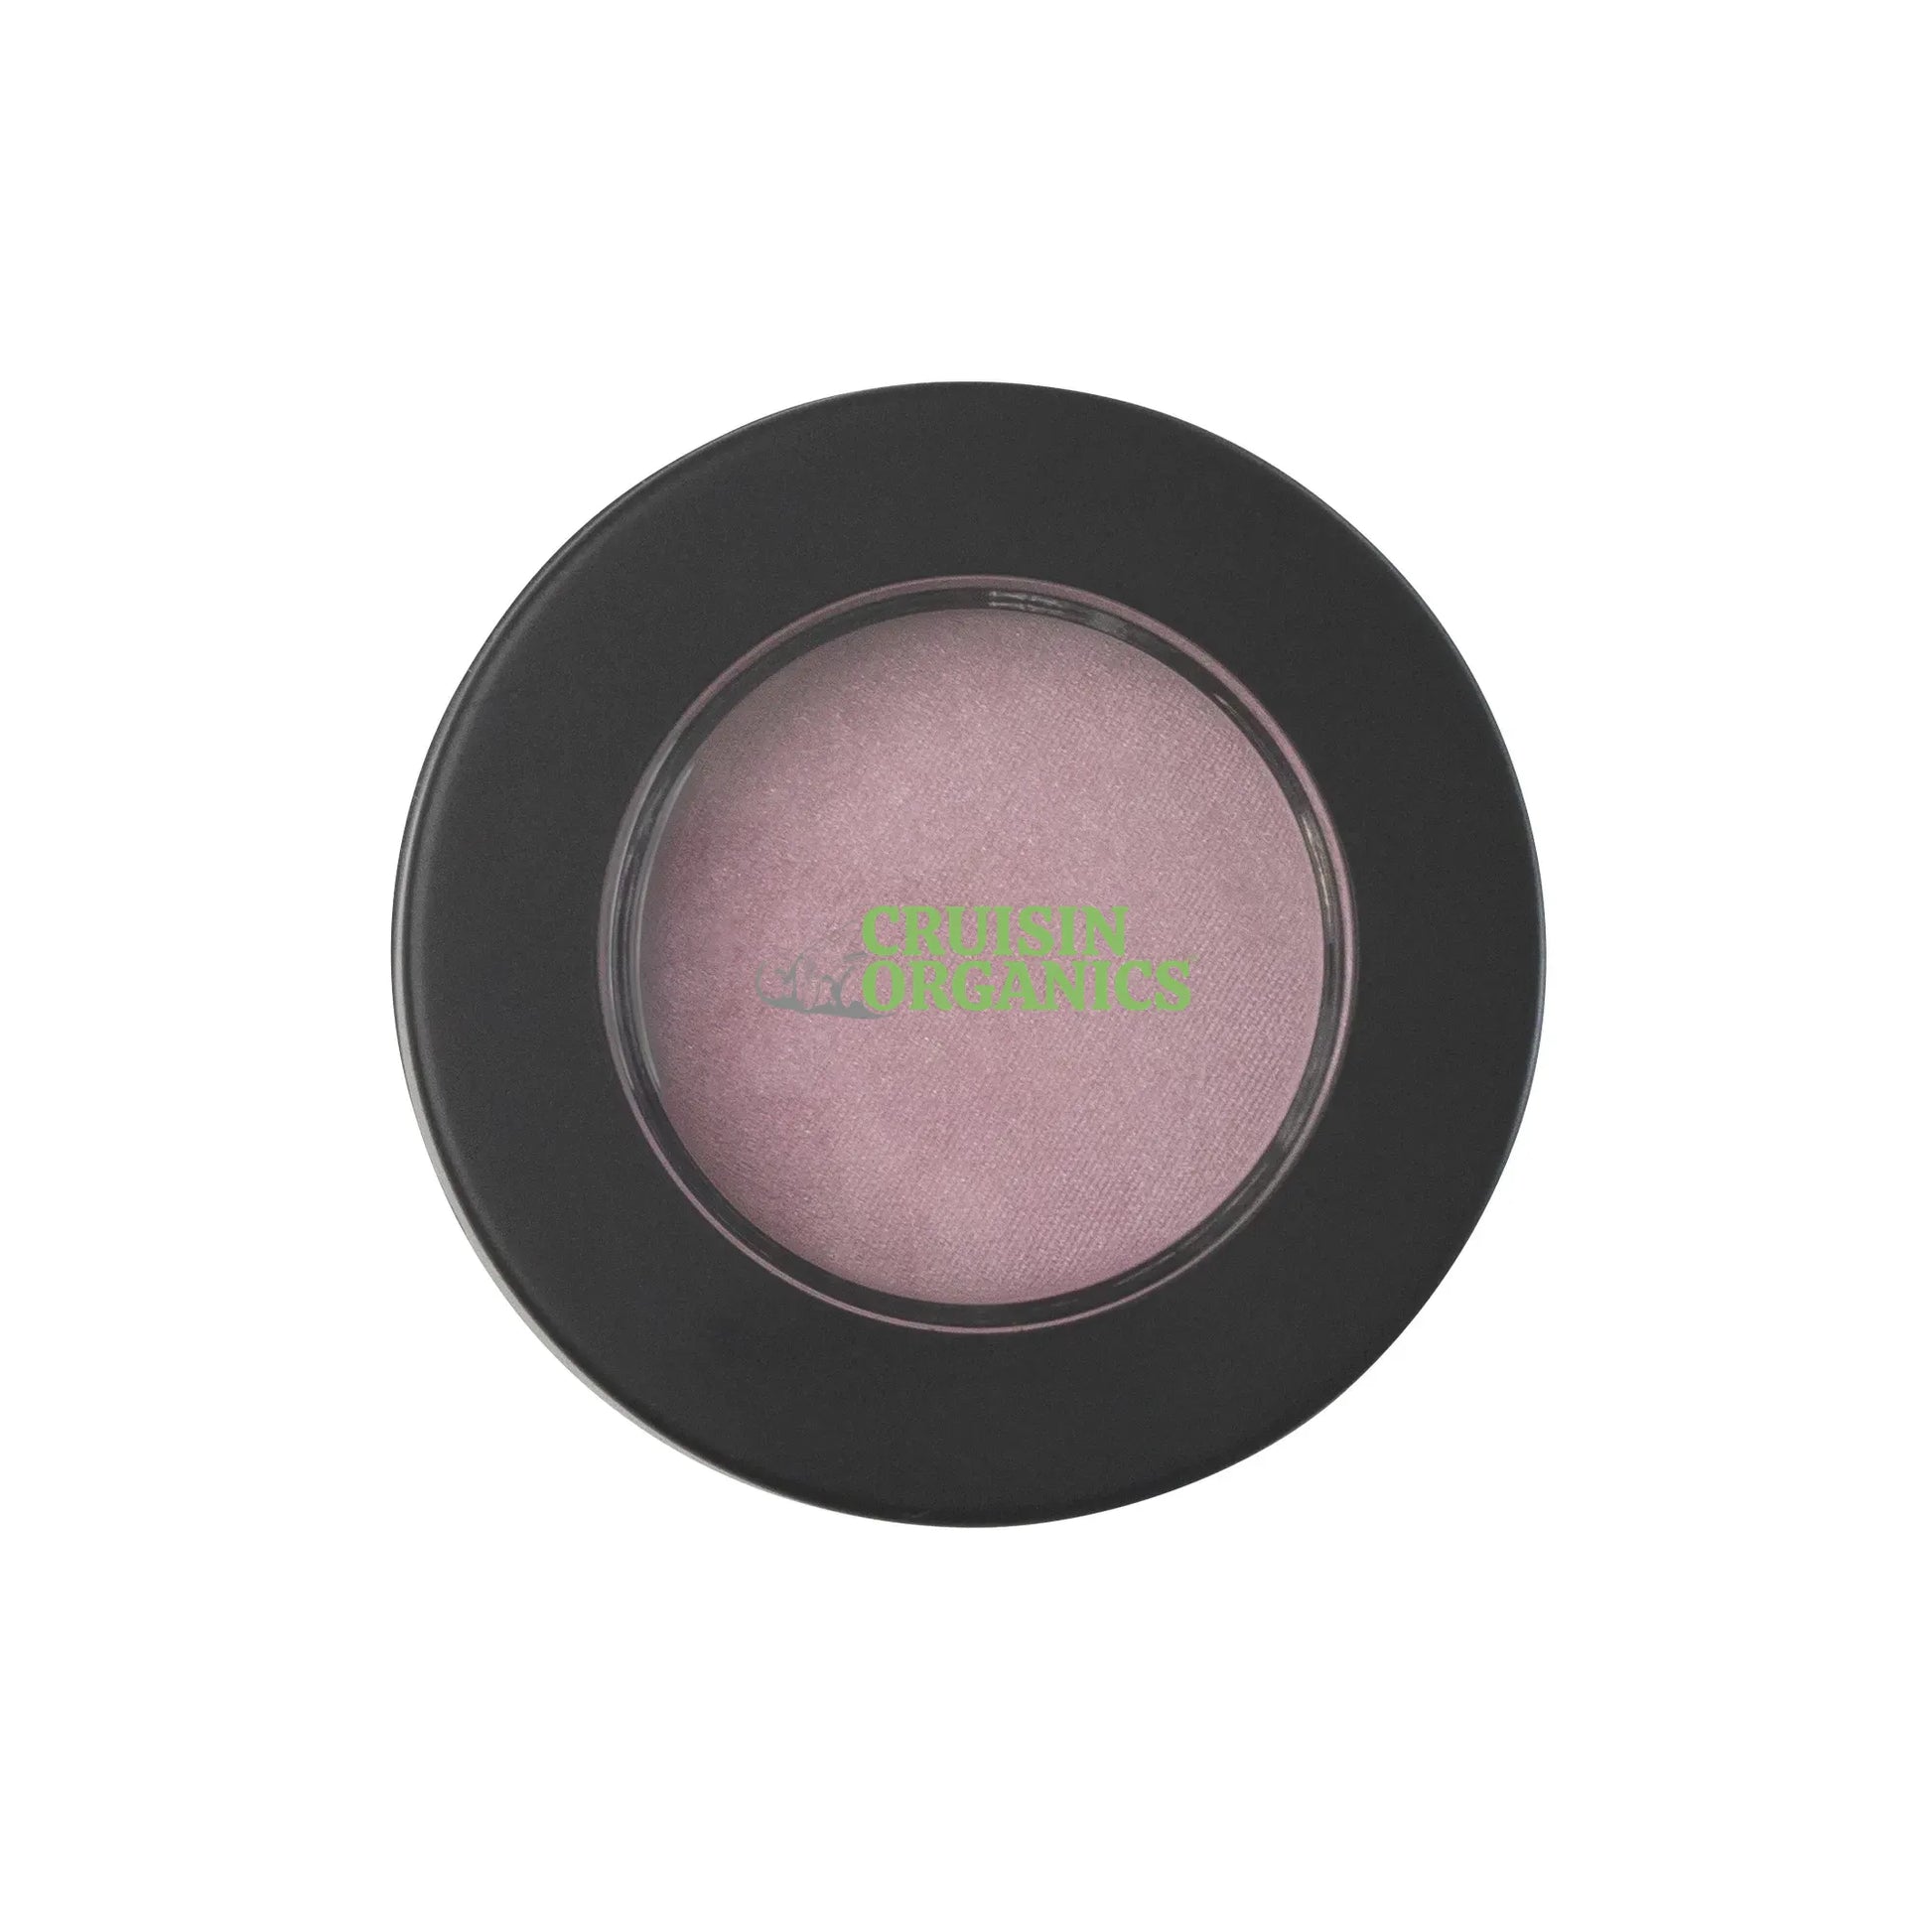 Eye magic with Bunny Single Pan Eyeshadow by Cruisin Organics. This high-quality eyeshadow offers a wide range of shades to fit your imagination and create eye opening looks. Professional-grade and cruelty-free, this eyeshadow is curated for achieving cover-worthy looks.